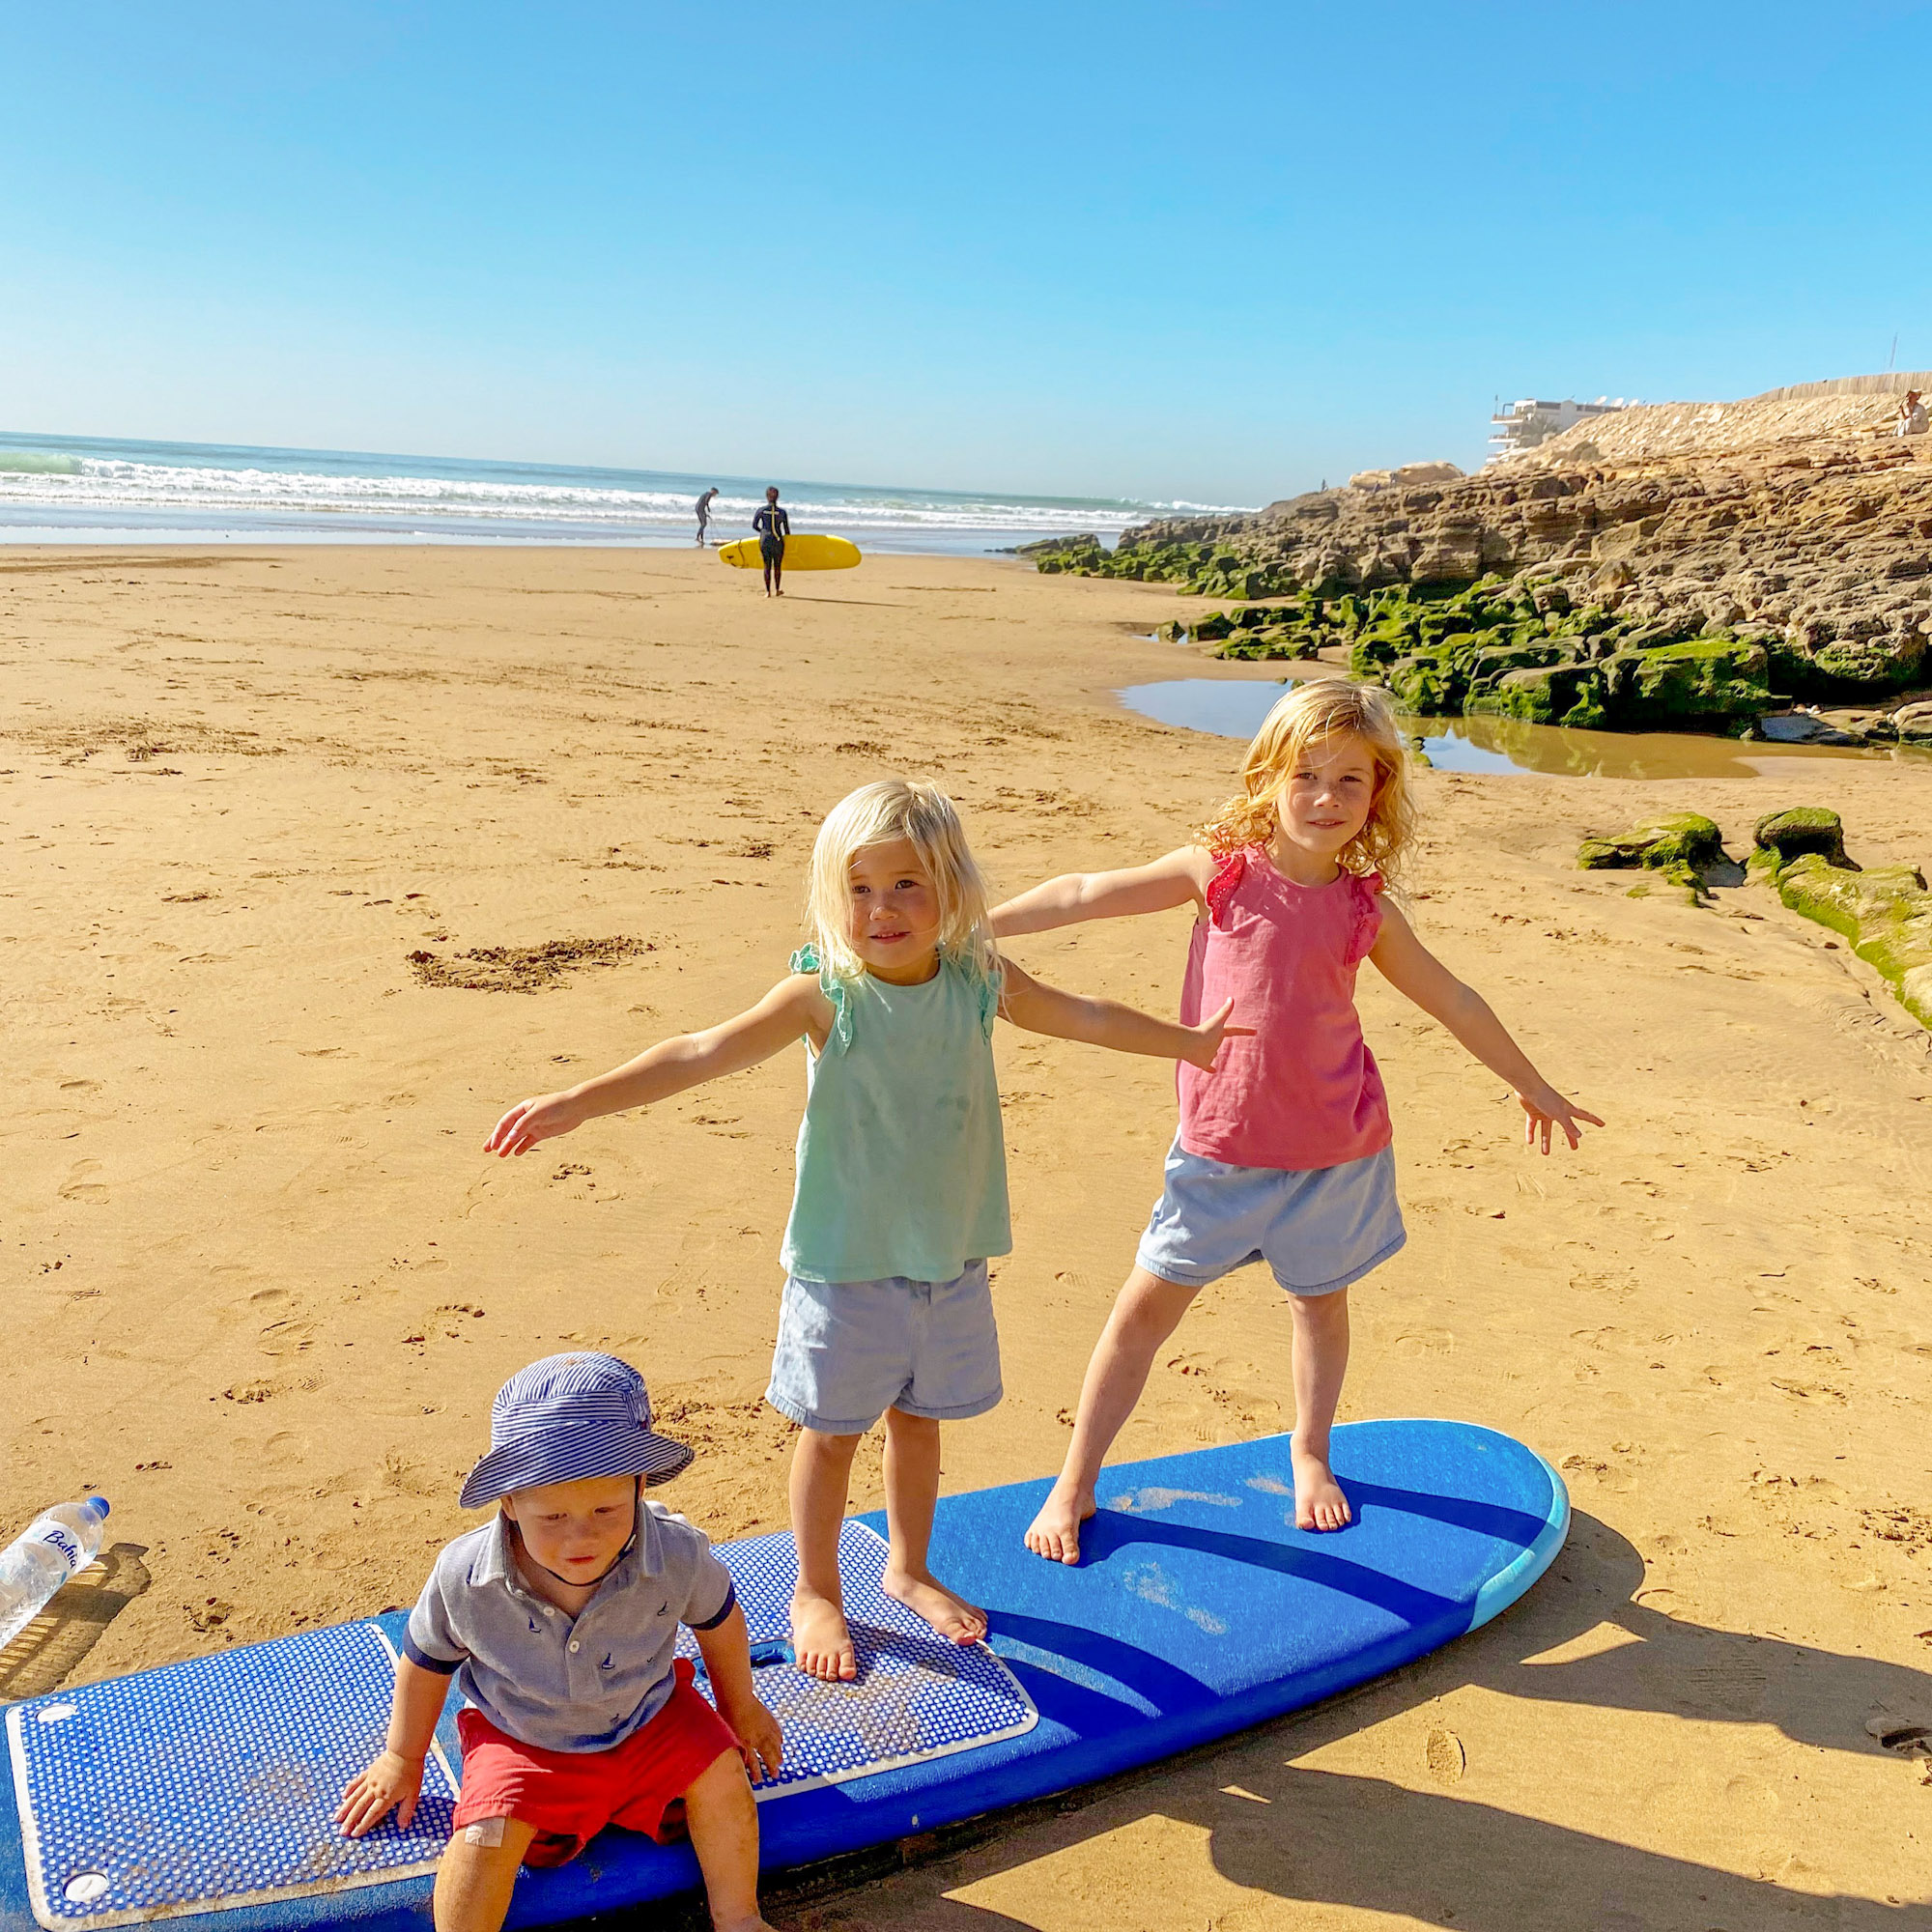 3 small children standing on a surfboard on the beach at Taghazout, Morocco